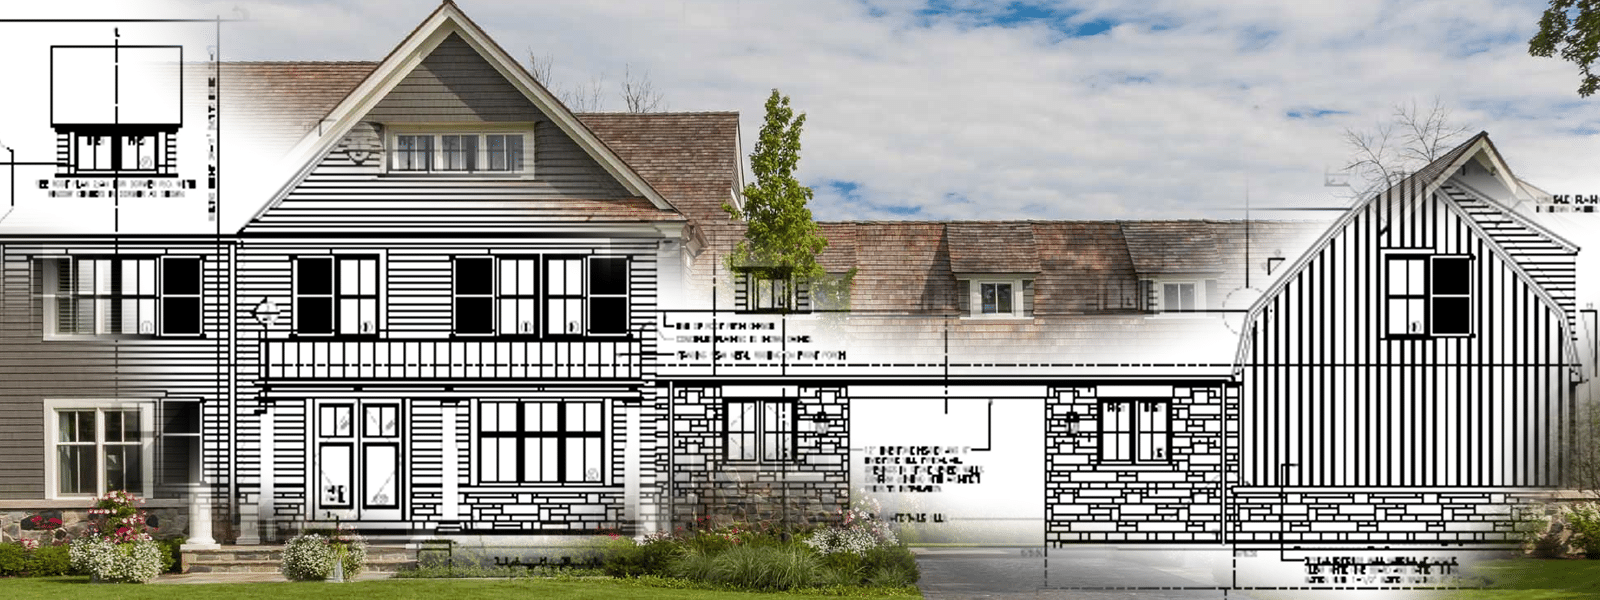 Architectural drawings blended with finished photo of the front exterior of rustic chic farmhouse with barn and drive-through to garage at back